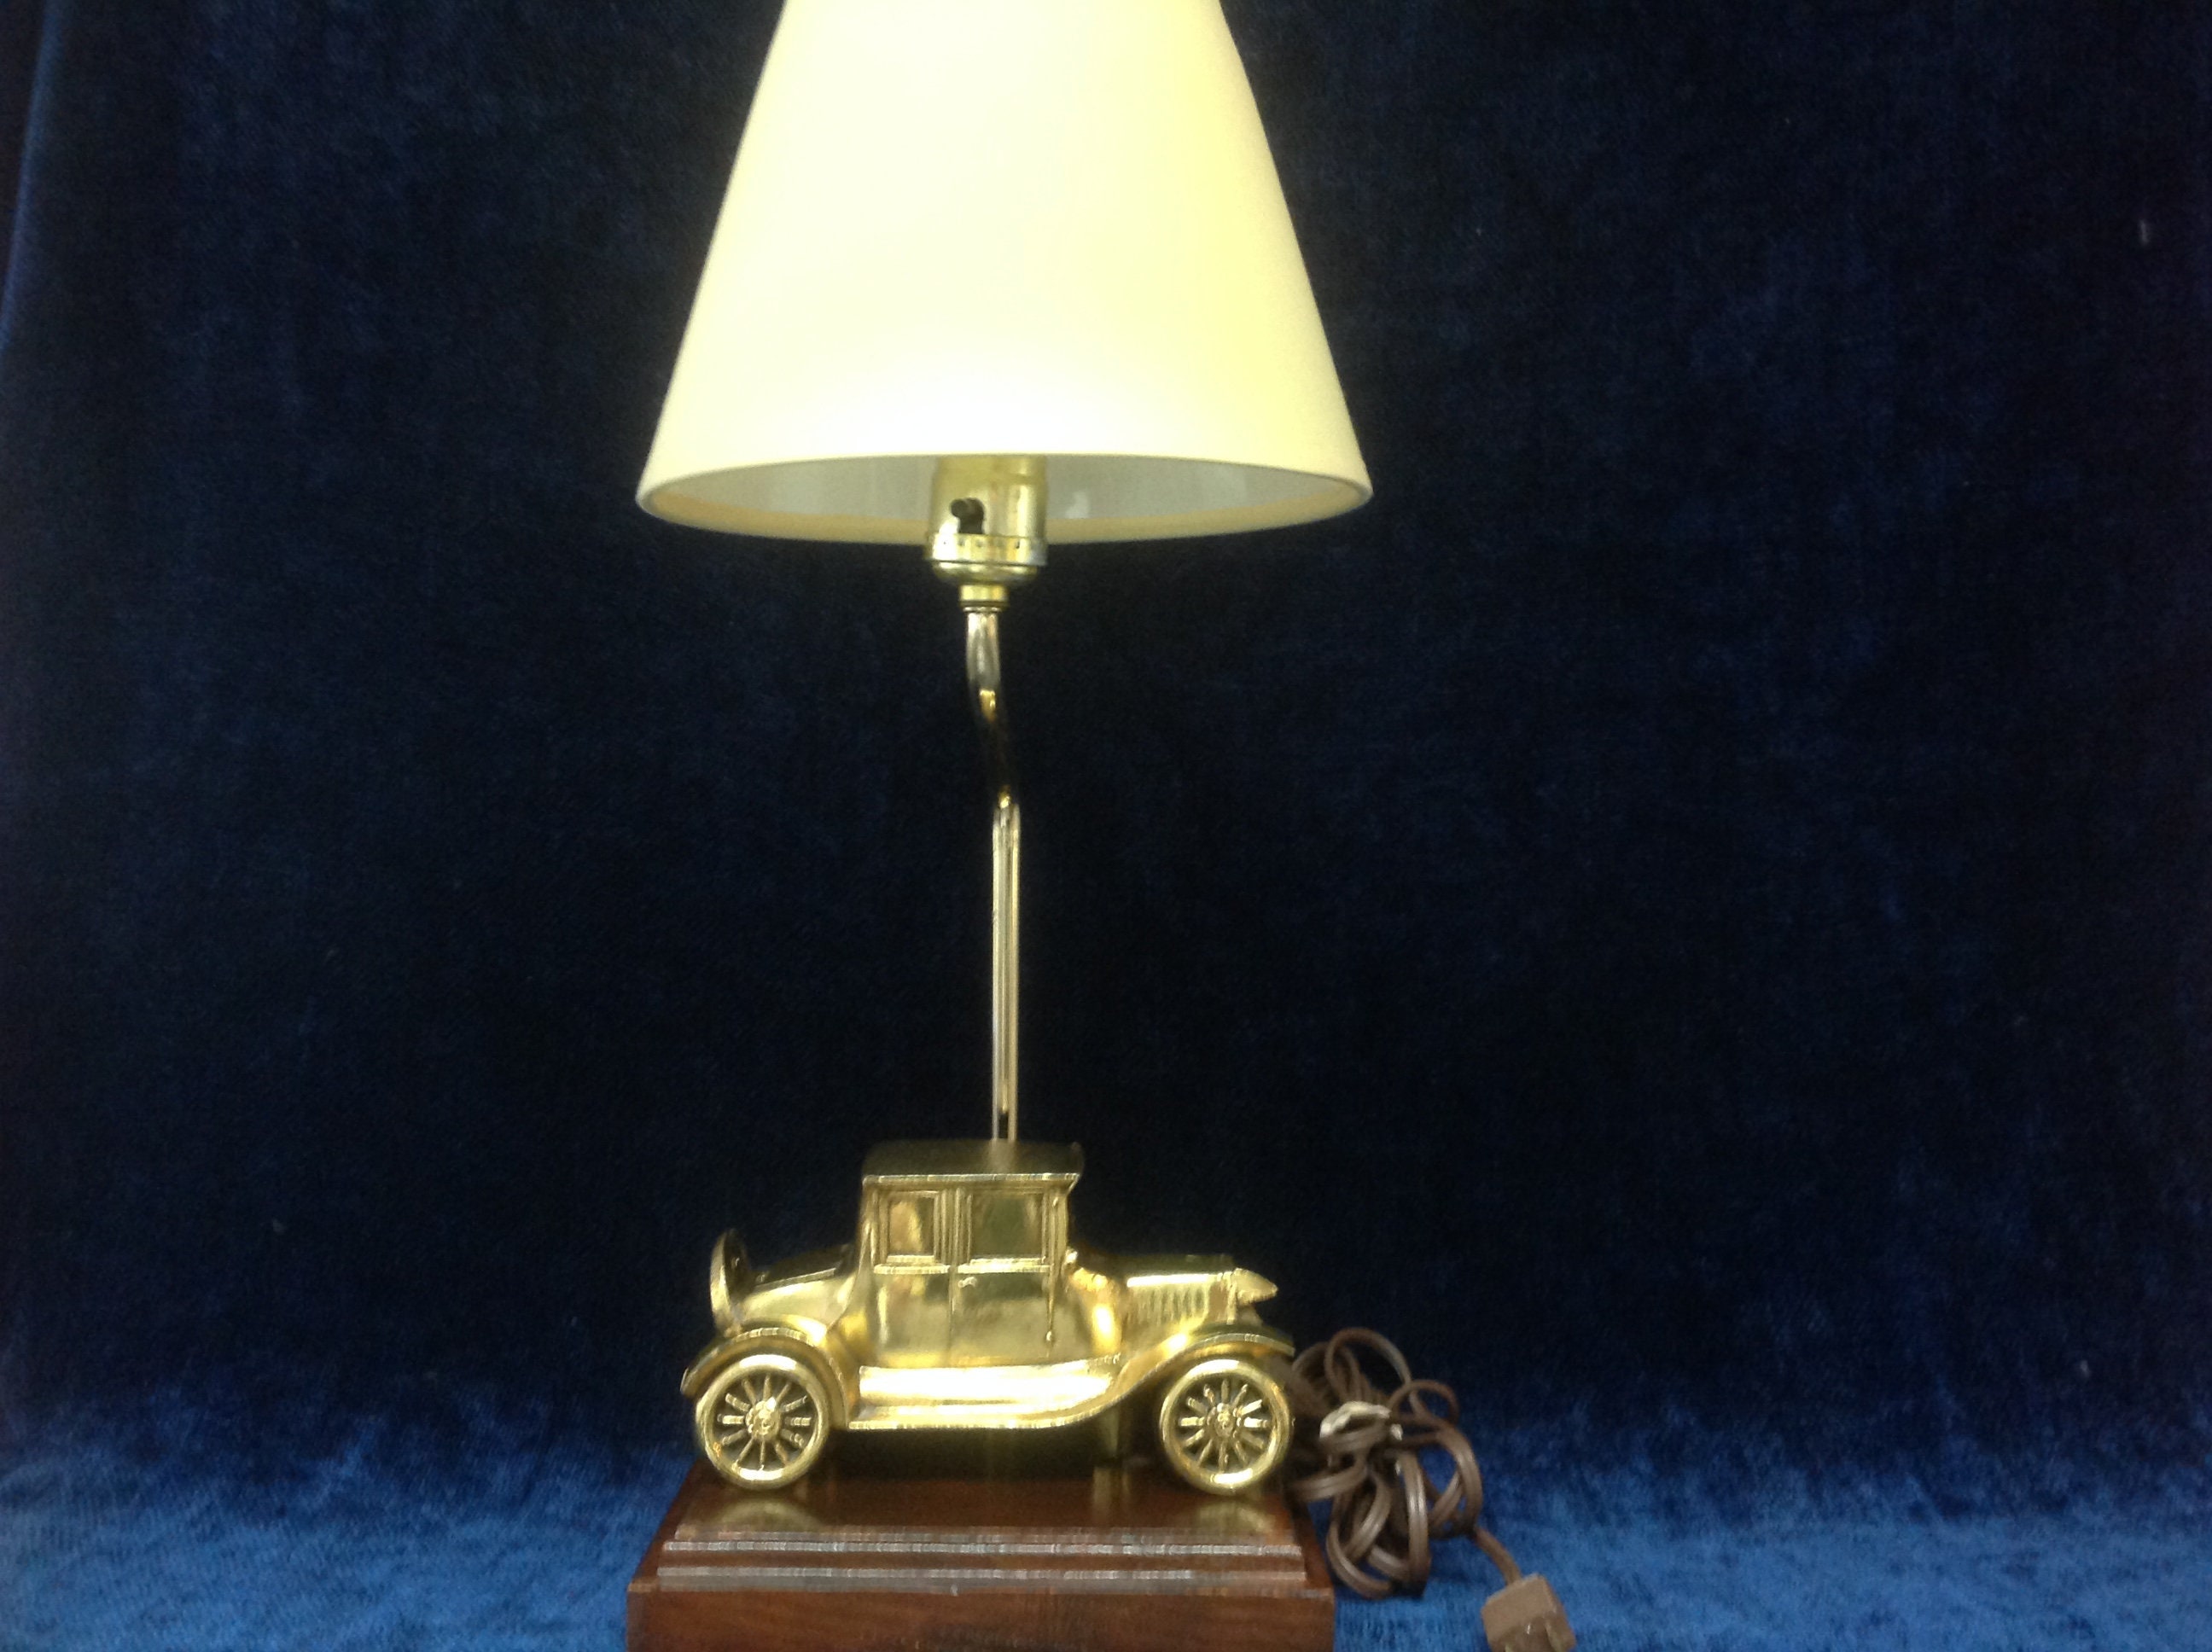 4 Ford Model T's - Table Lamp ,Steampunk lamp, Rustic decor, men